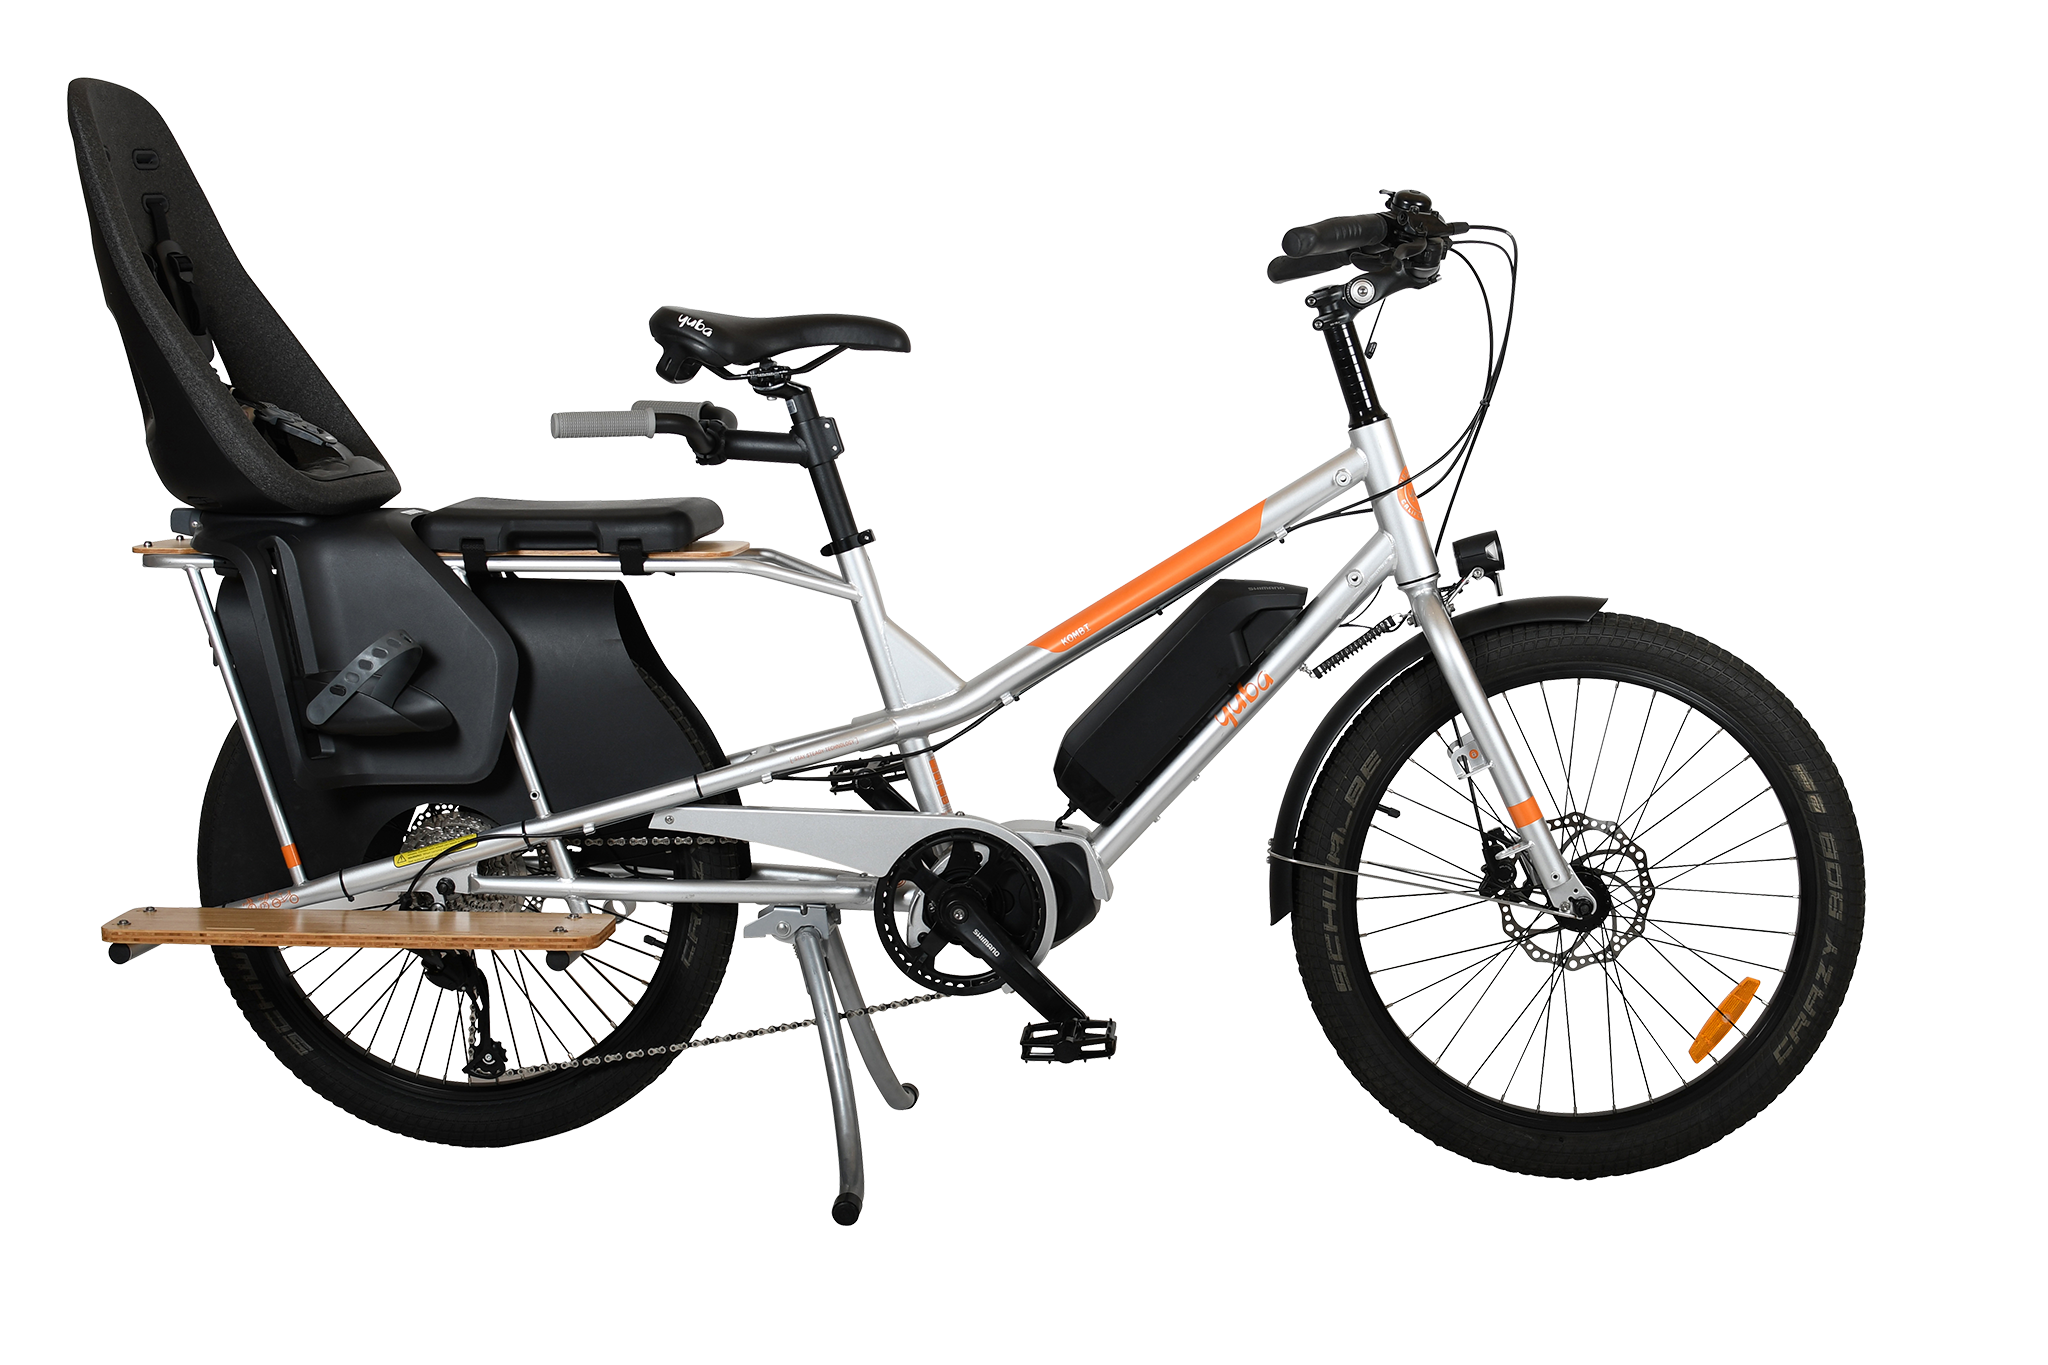 A product image of the Yuba Kombi E5 electric longtail cargo bike which can be hired from LeaseBike. The photo shows the right side of the cargo bike with a child seat and soft sport seat attached to the rear rack.